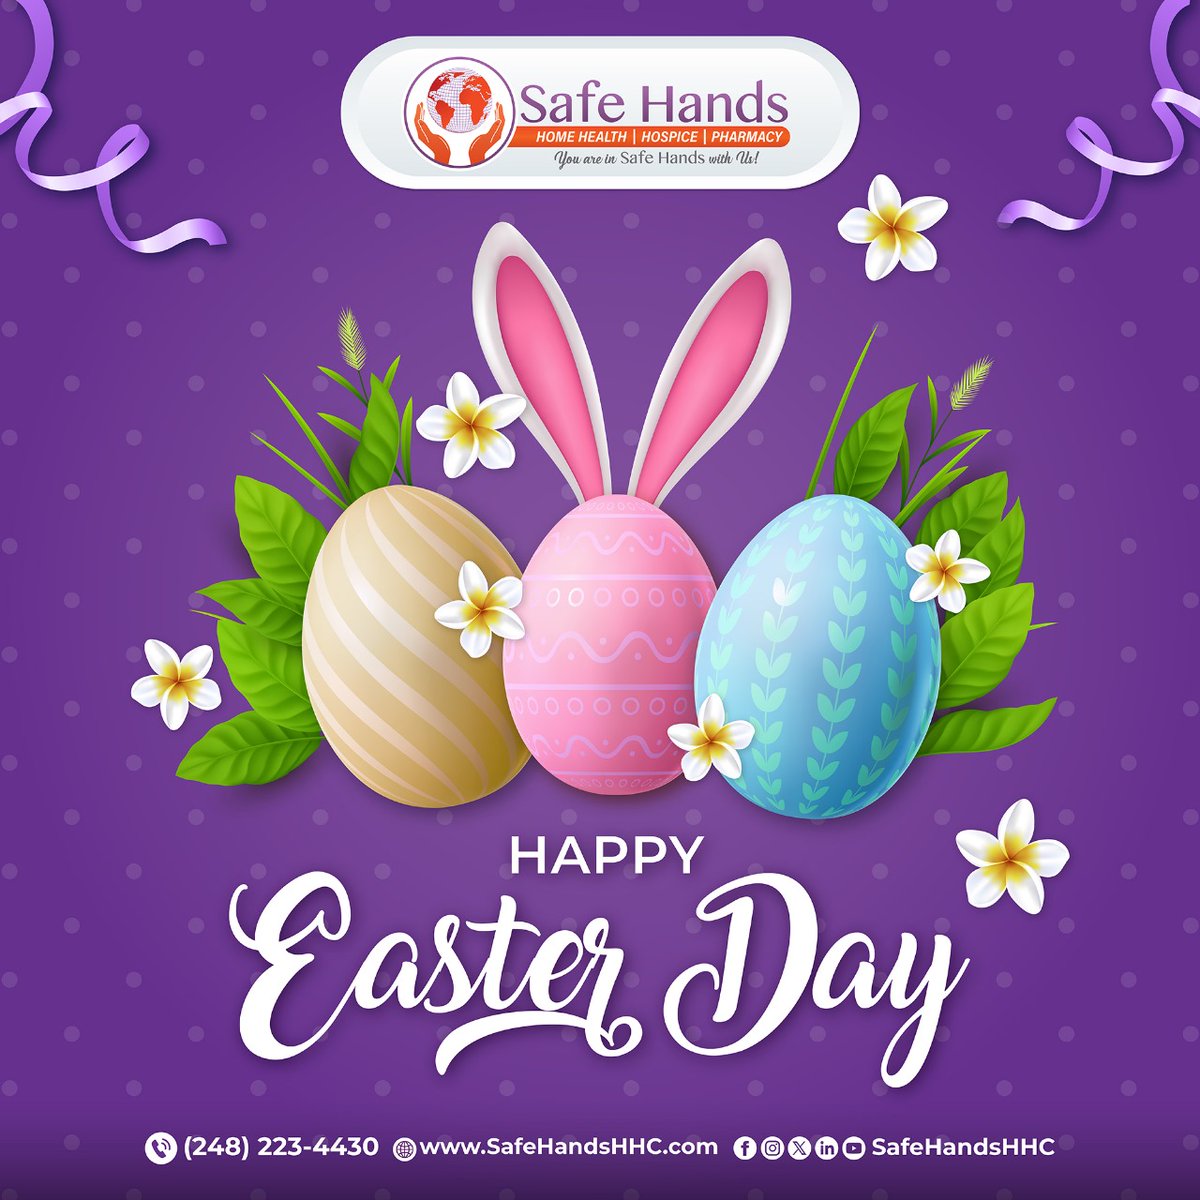 Wishing you a joyful Easter filled with health and happiness. Celebrate this day of new beginnings with the care of Safe Hands.

#happyeaster2024 #enjoyeasterday #SafeHandsHHC #feelsavewithus #homehealthcare #home_health_aides #EasterSunday